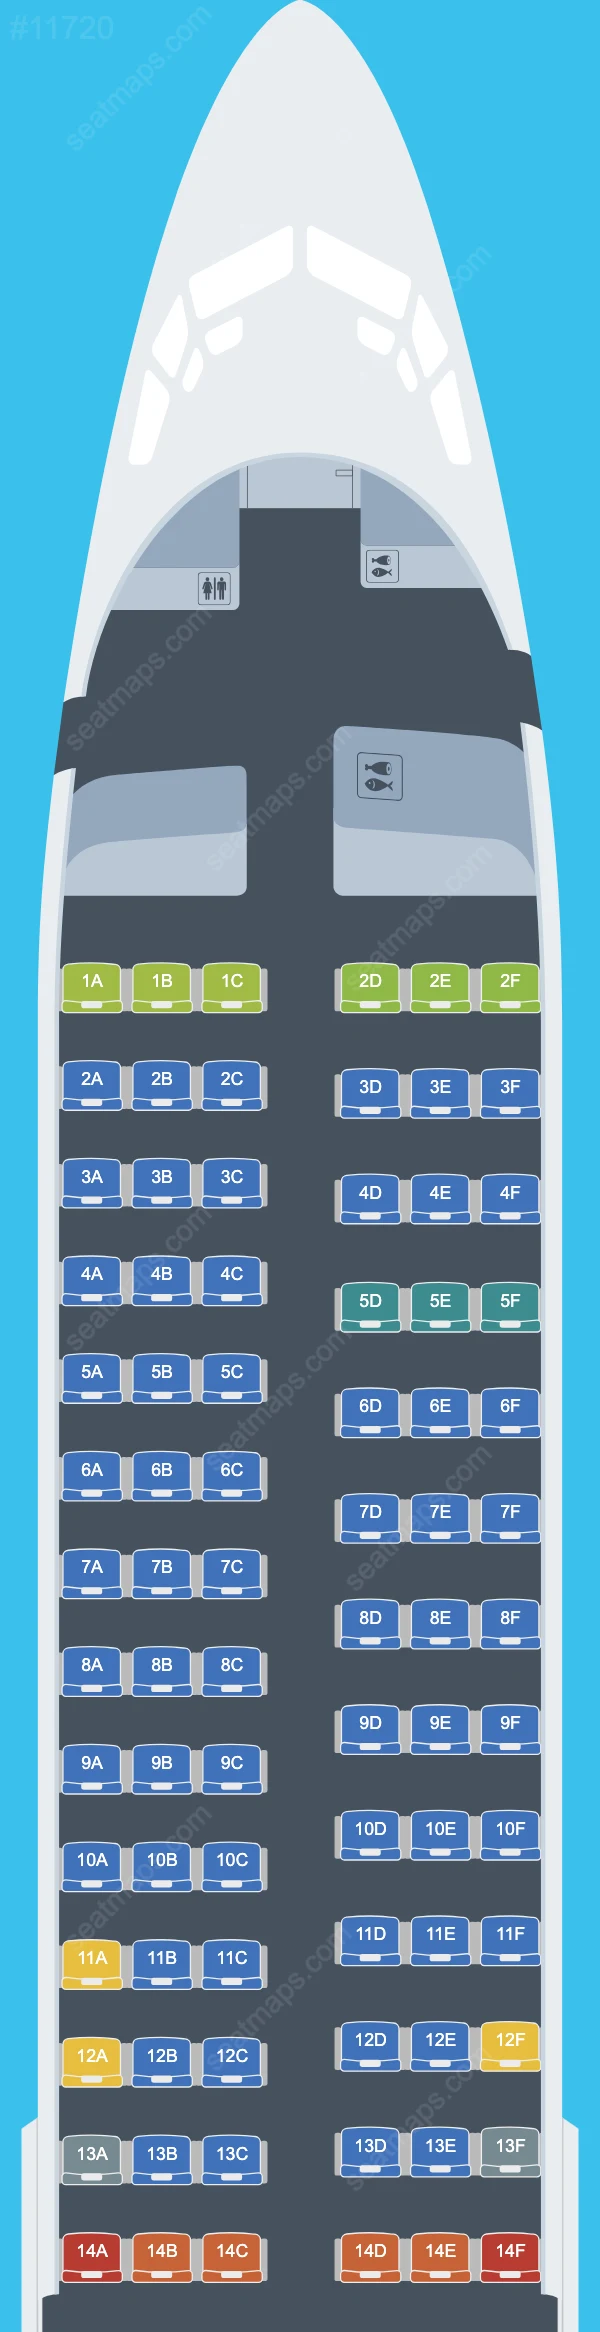 SkyUp MT Boeing 737-800 aircraft seat map  737-800